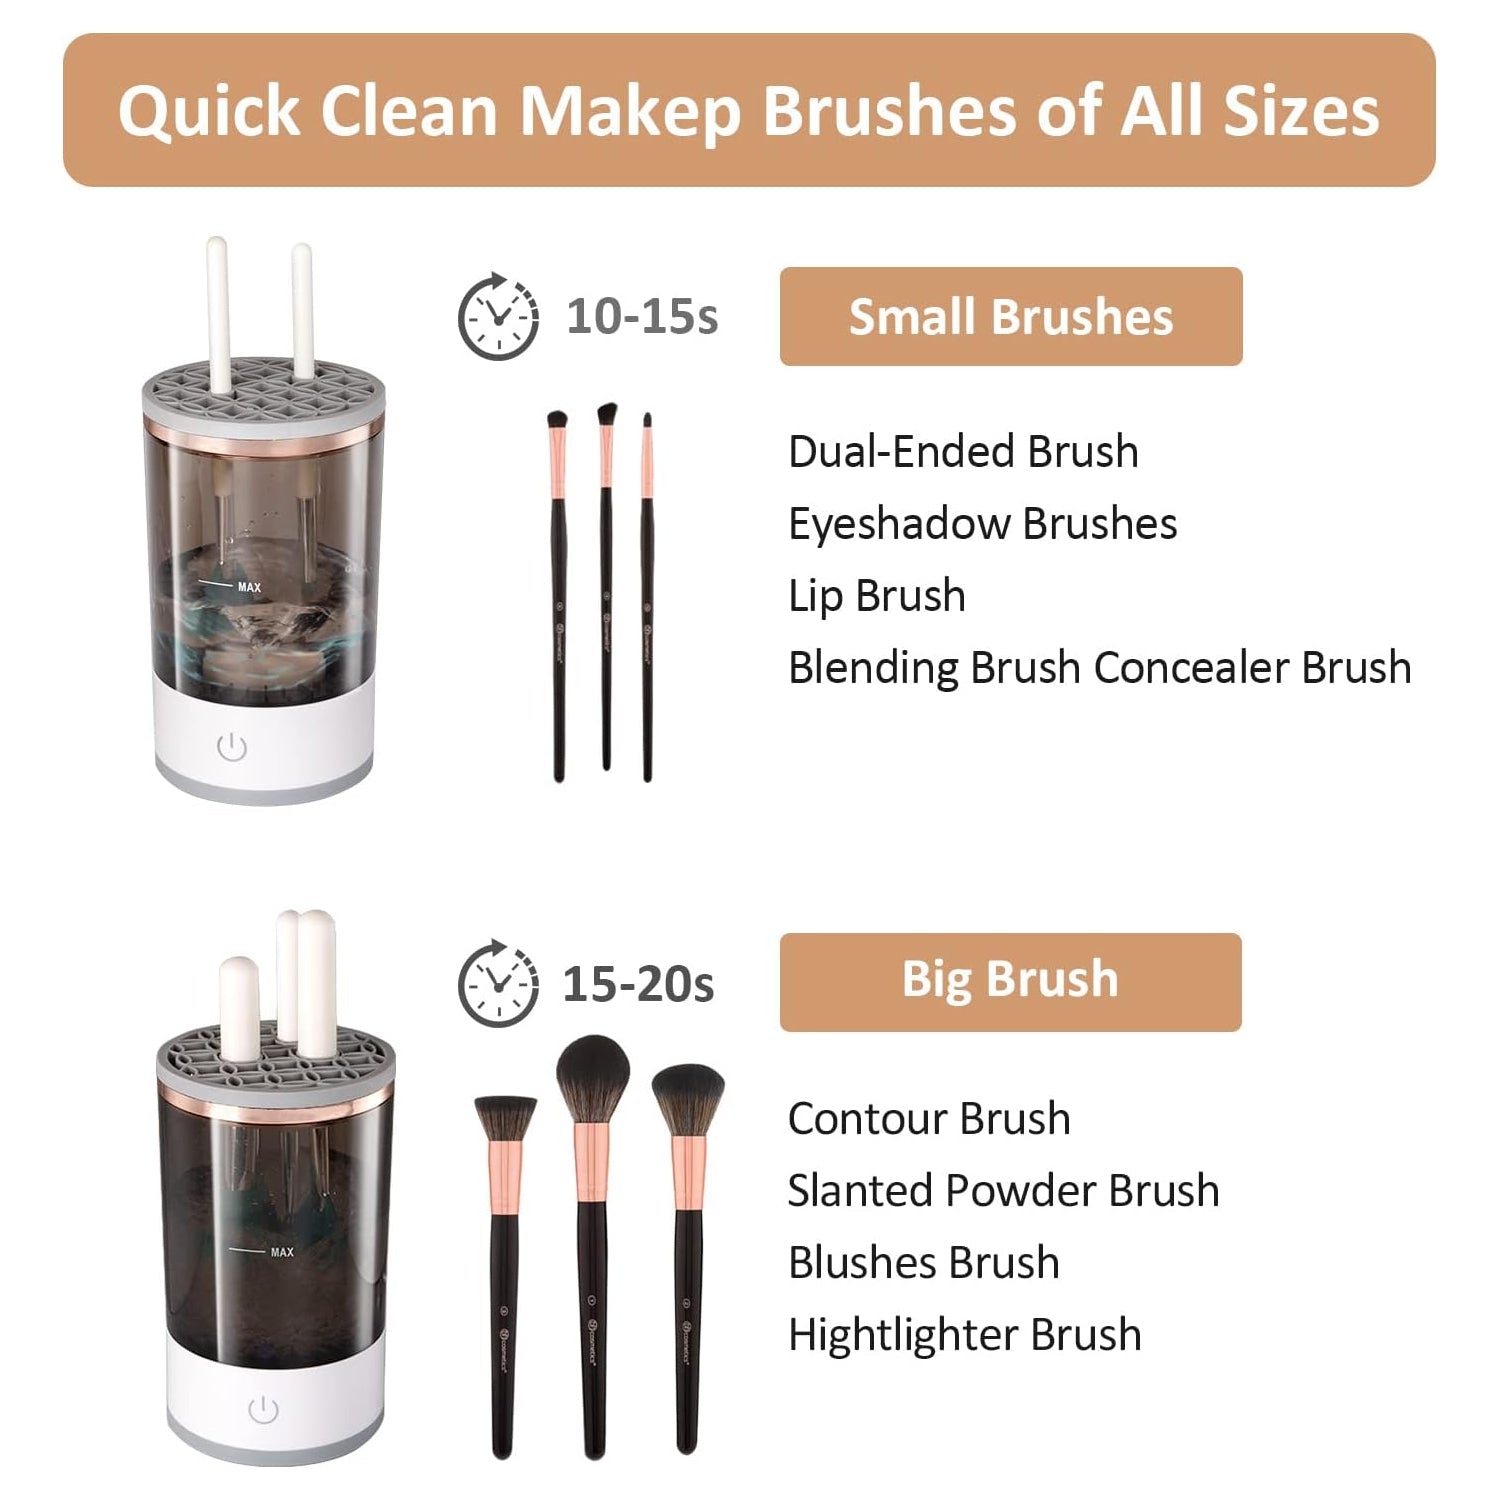 12987 Automatic Makeup Brush Cleaner Fast Electric Brush Cleaner Hand Free Machine Super Clean Brush Washer & Brushes Organizer Tool (1 Pc)